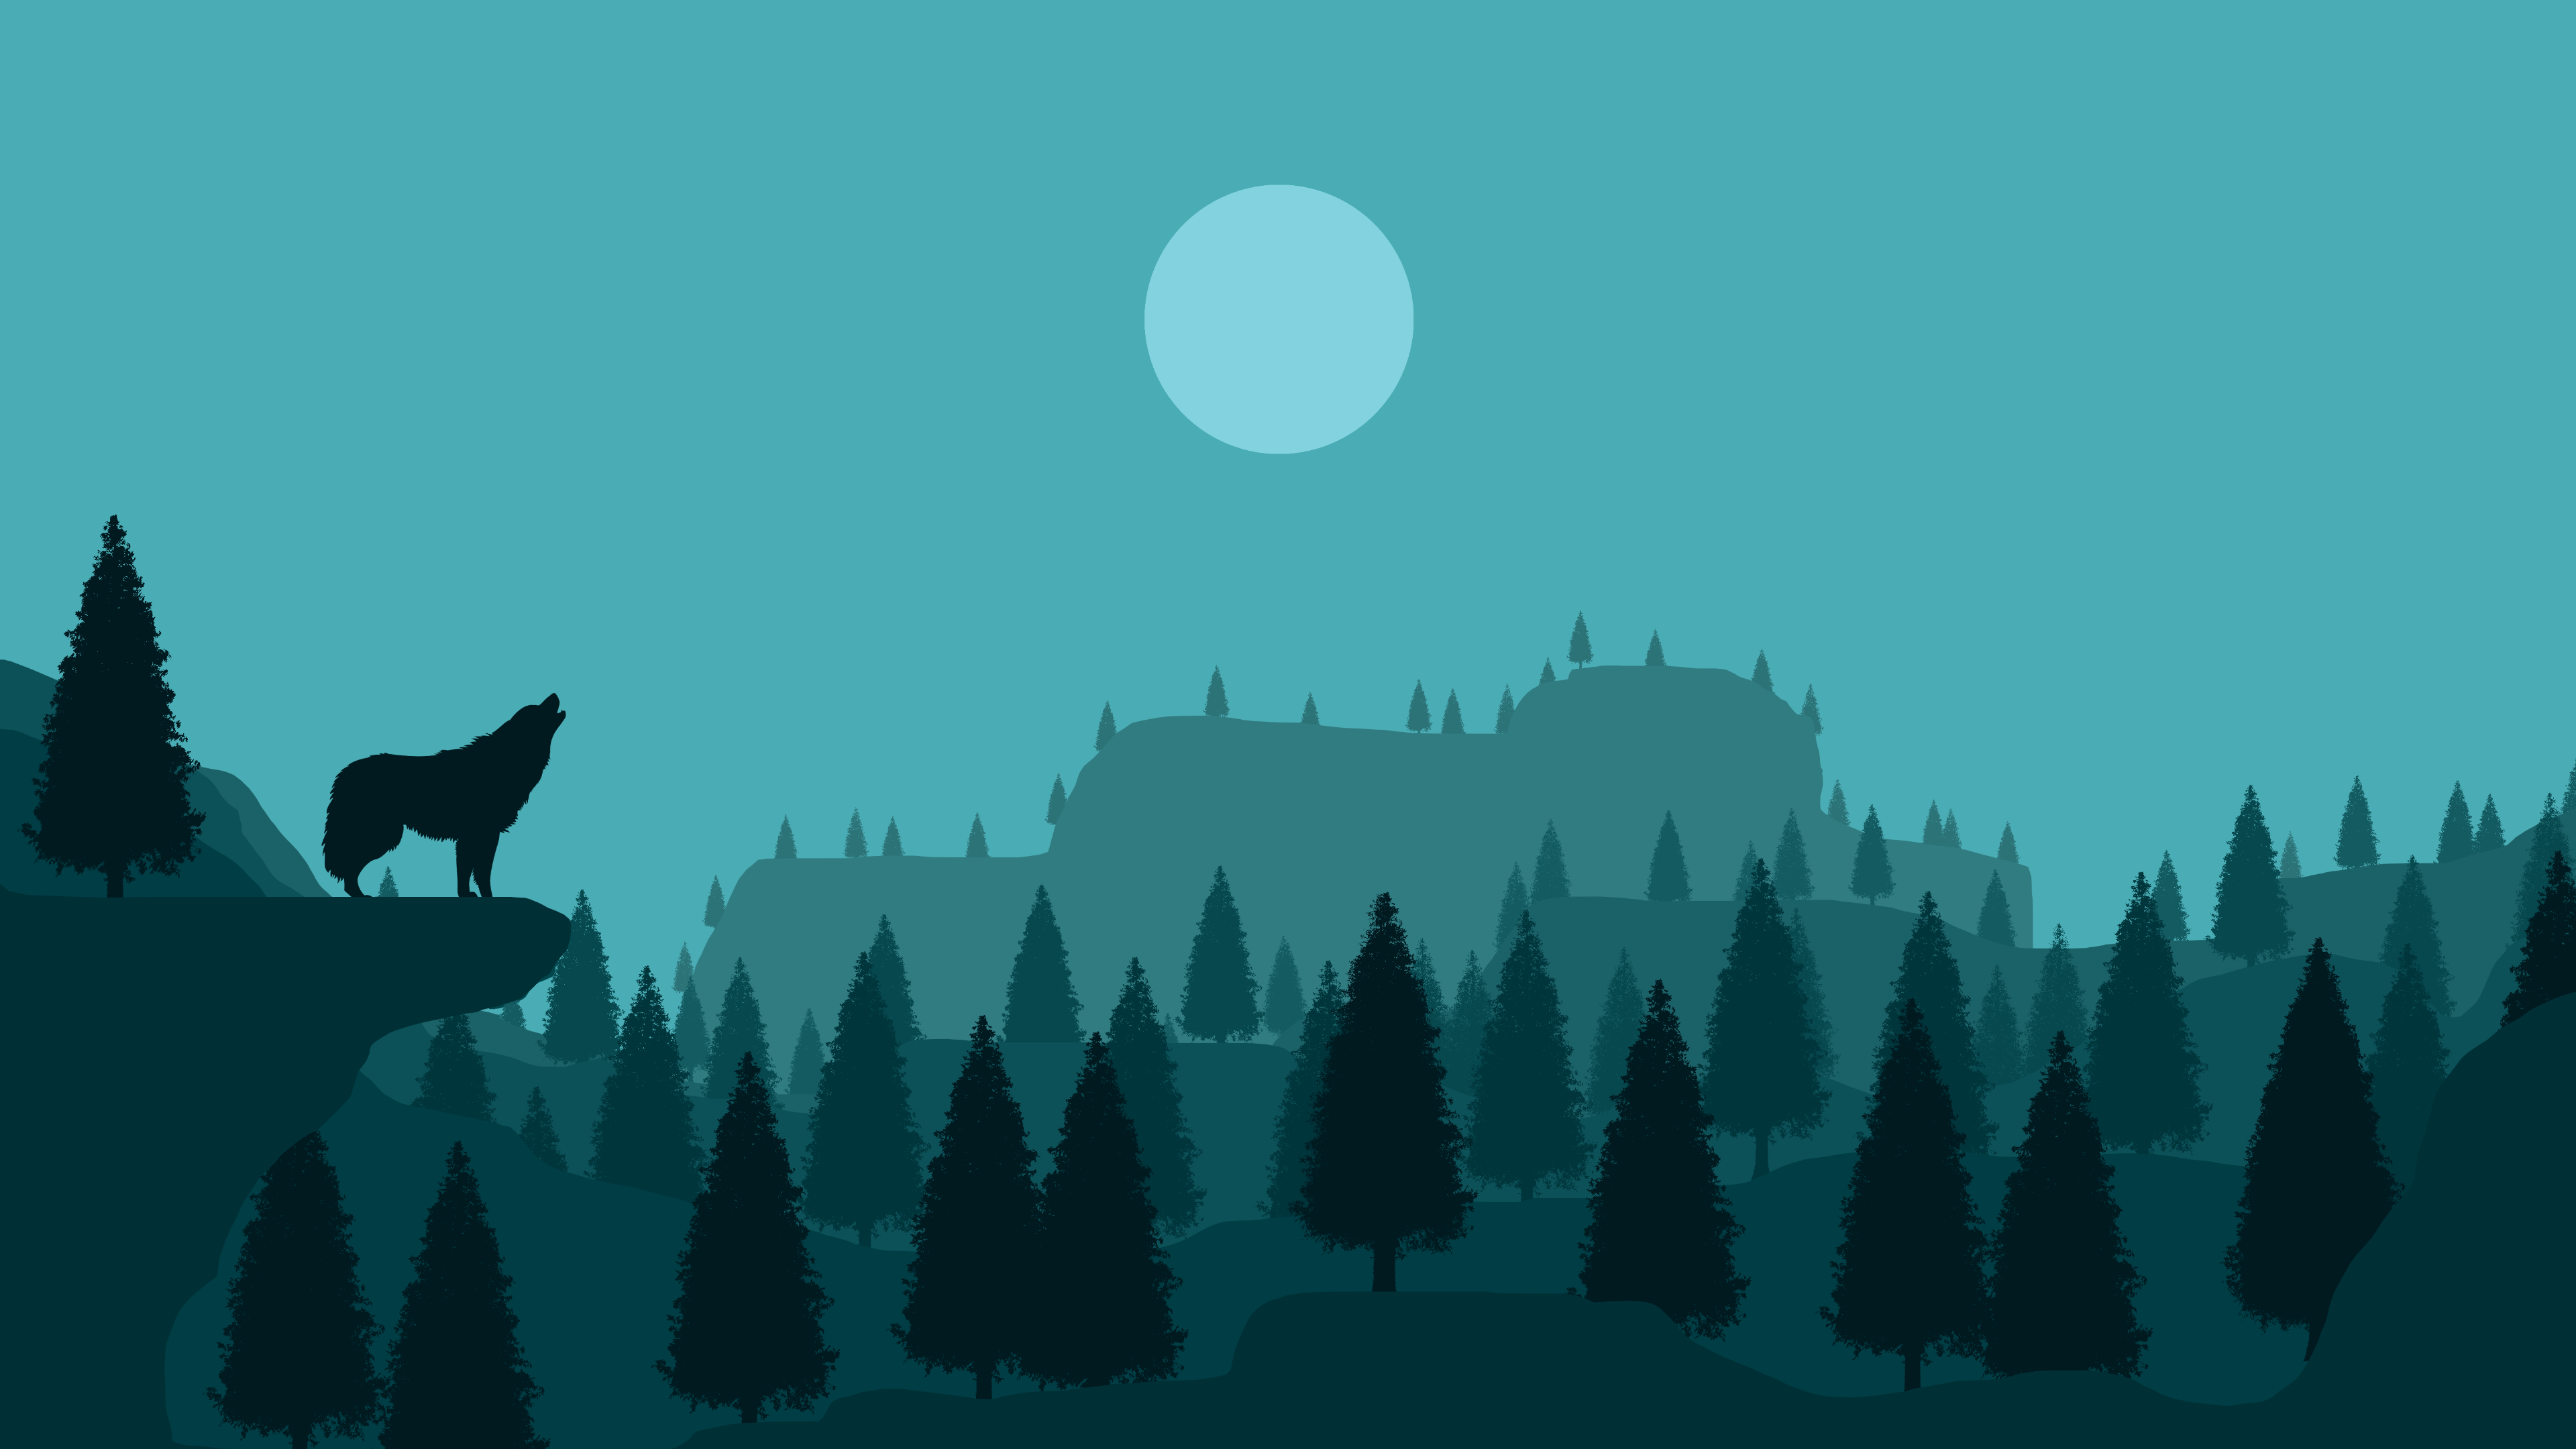 Background showing a wolf and a forest during night